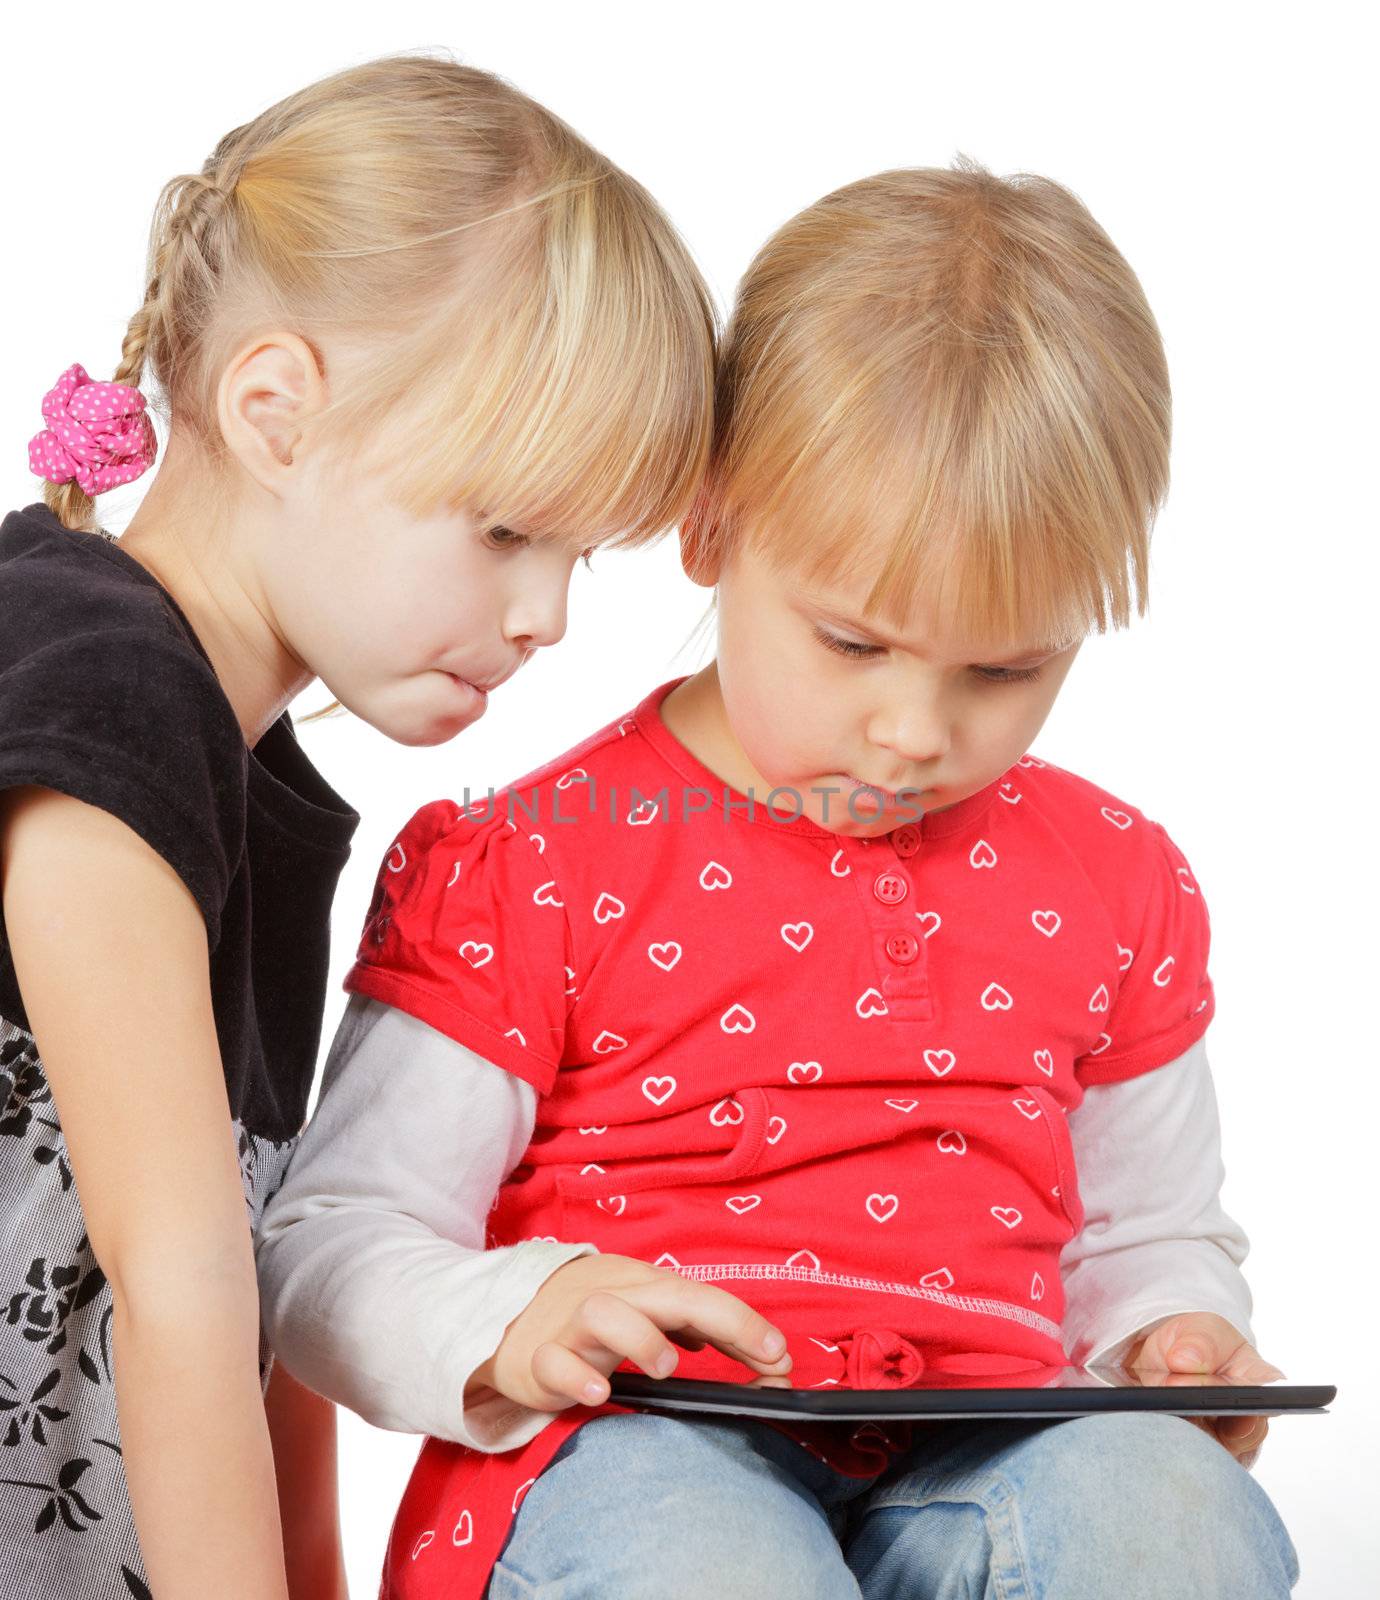 Two little girls using a touch pad